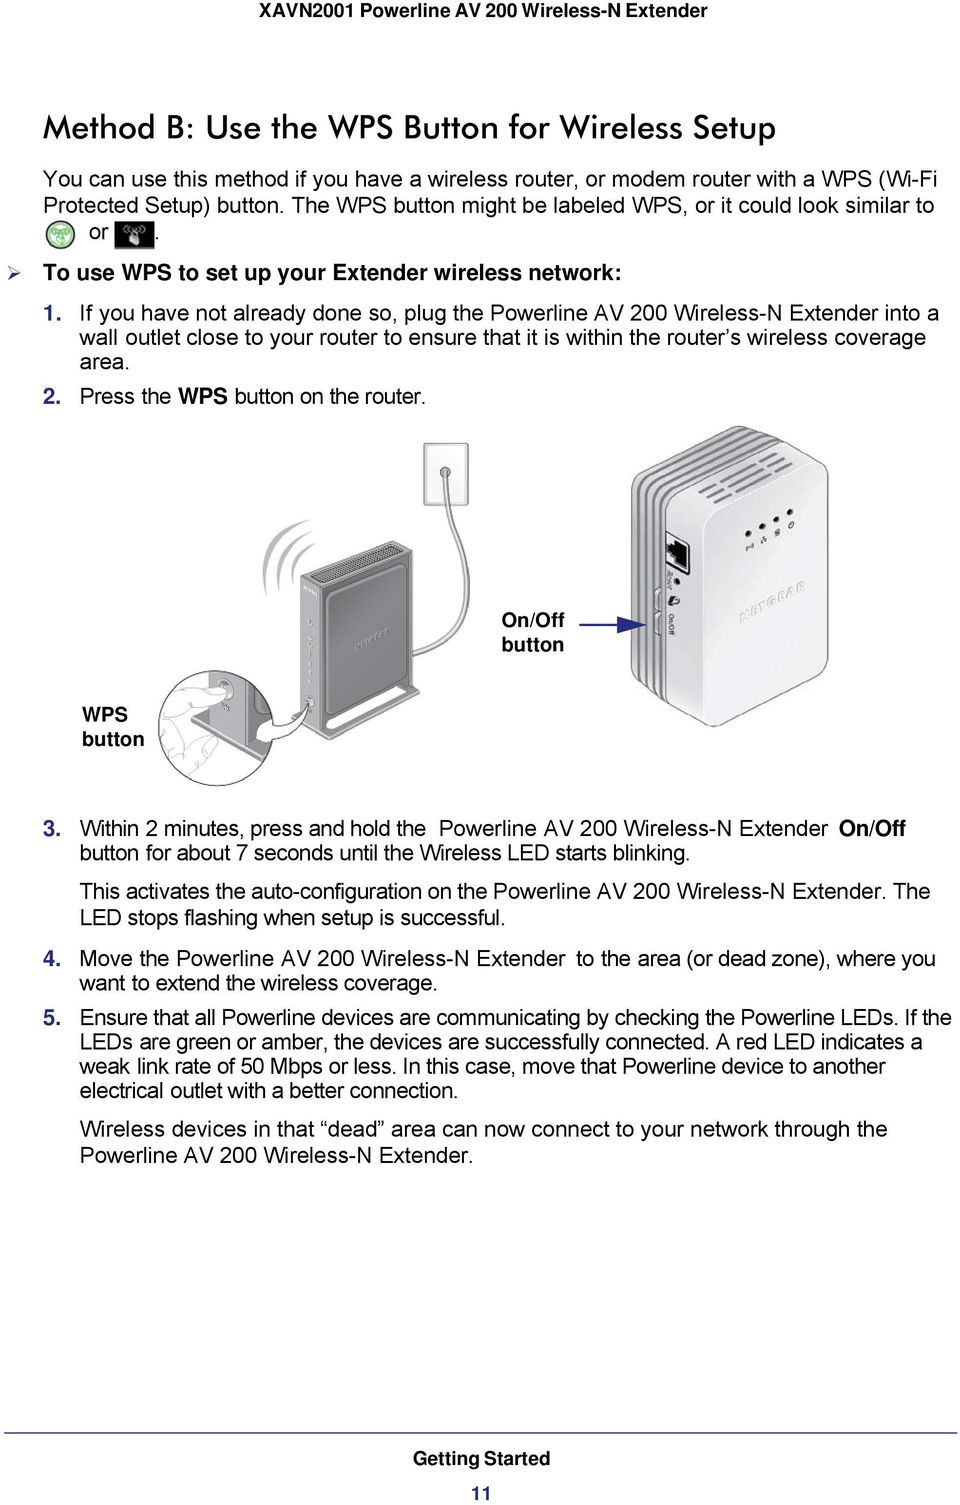 If you have not already done so, plug the Powerline AV 200 Wireless-N Extender into a wall outlet close to your router to ensure that it is within the router s wireless coverage area. 2. Press the WPS button on the router.